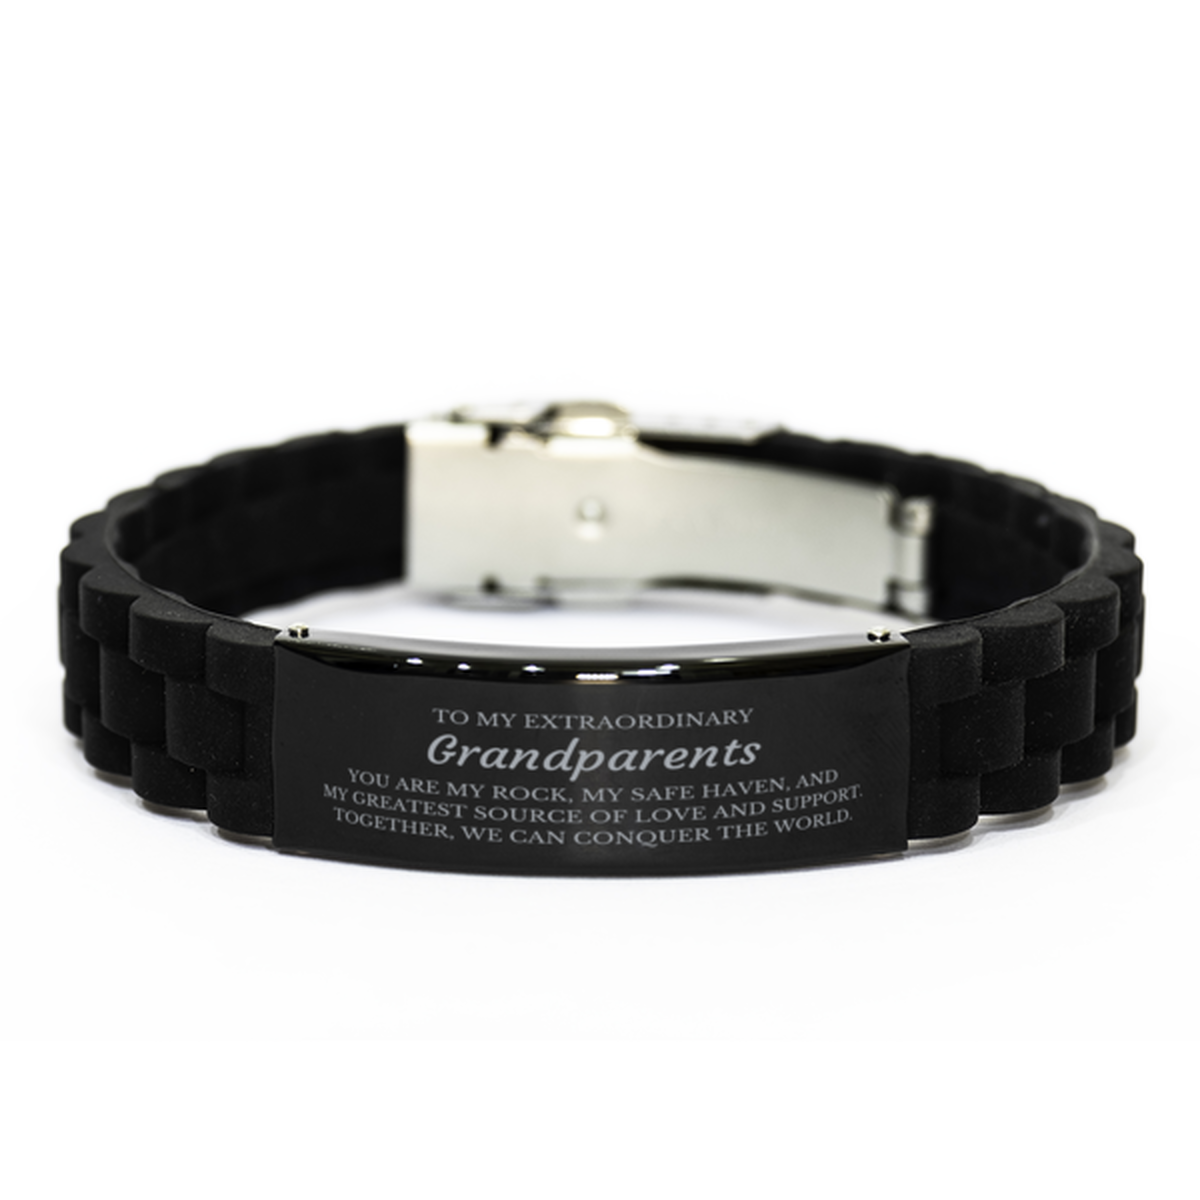 To My Extraordinary Grandparents Gifts, Together, we can conquer the world, Birthday Black Glidelock Clasp Bracelet For Grandparents, Christmas Gifts For Grandparents